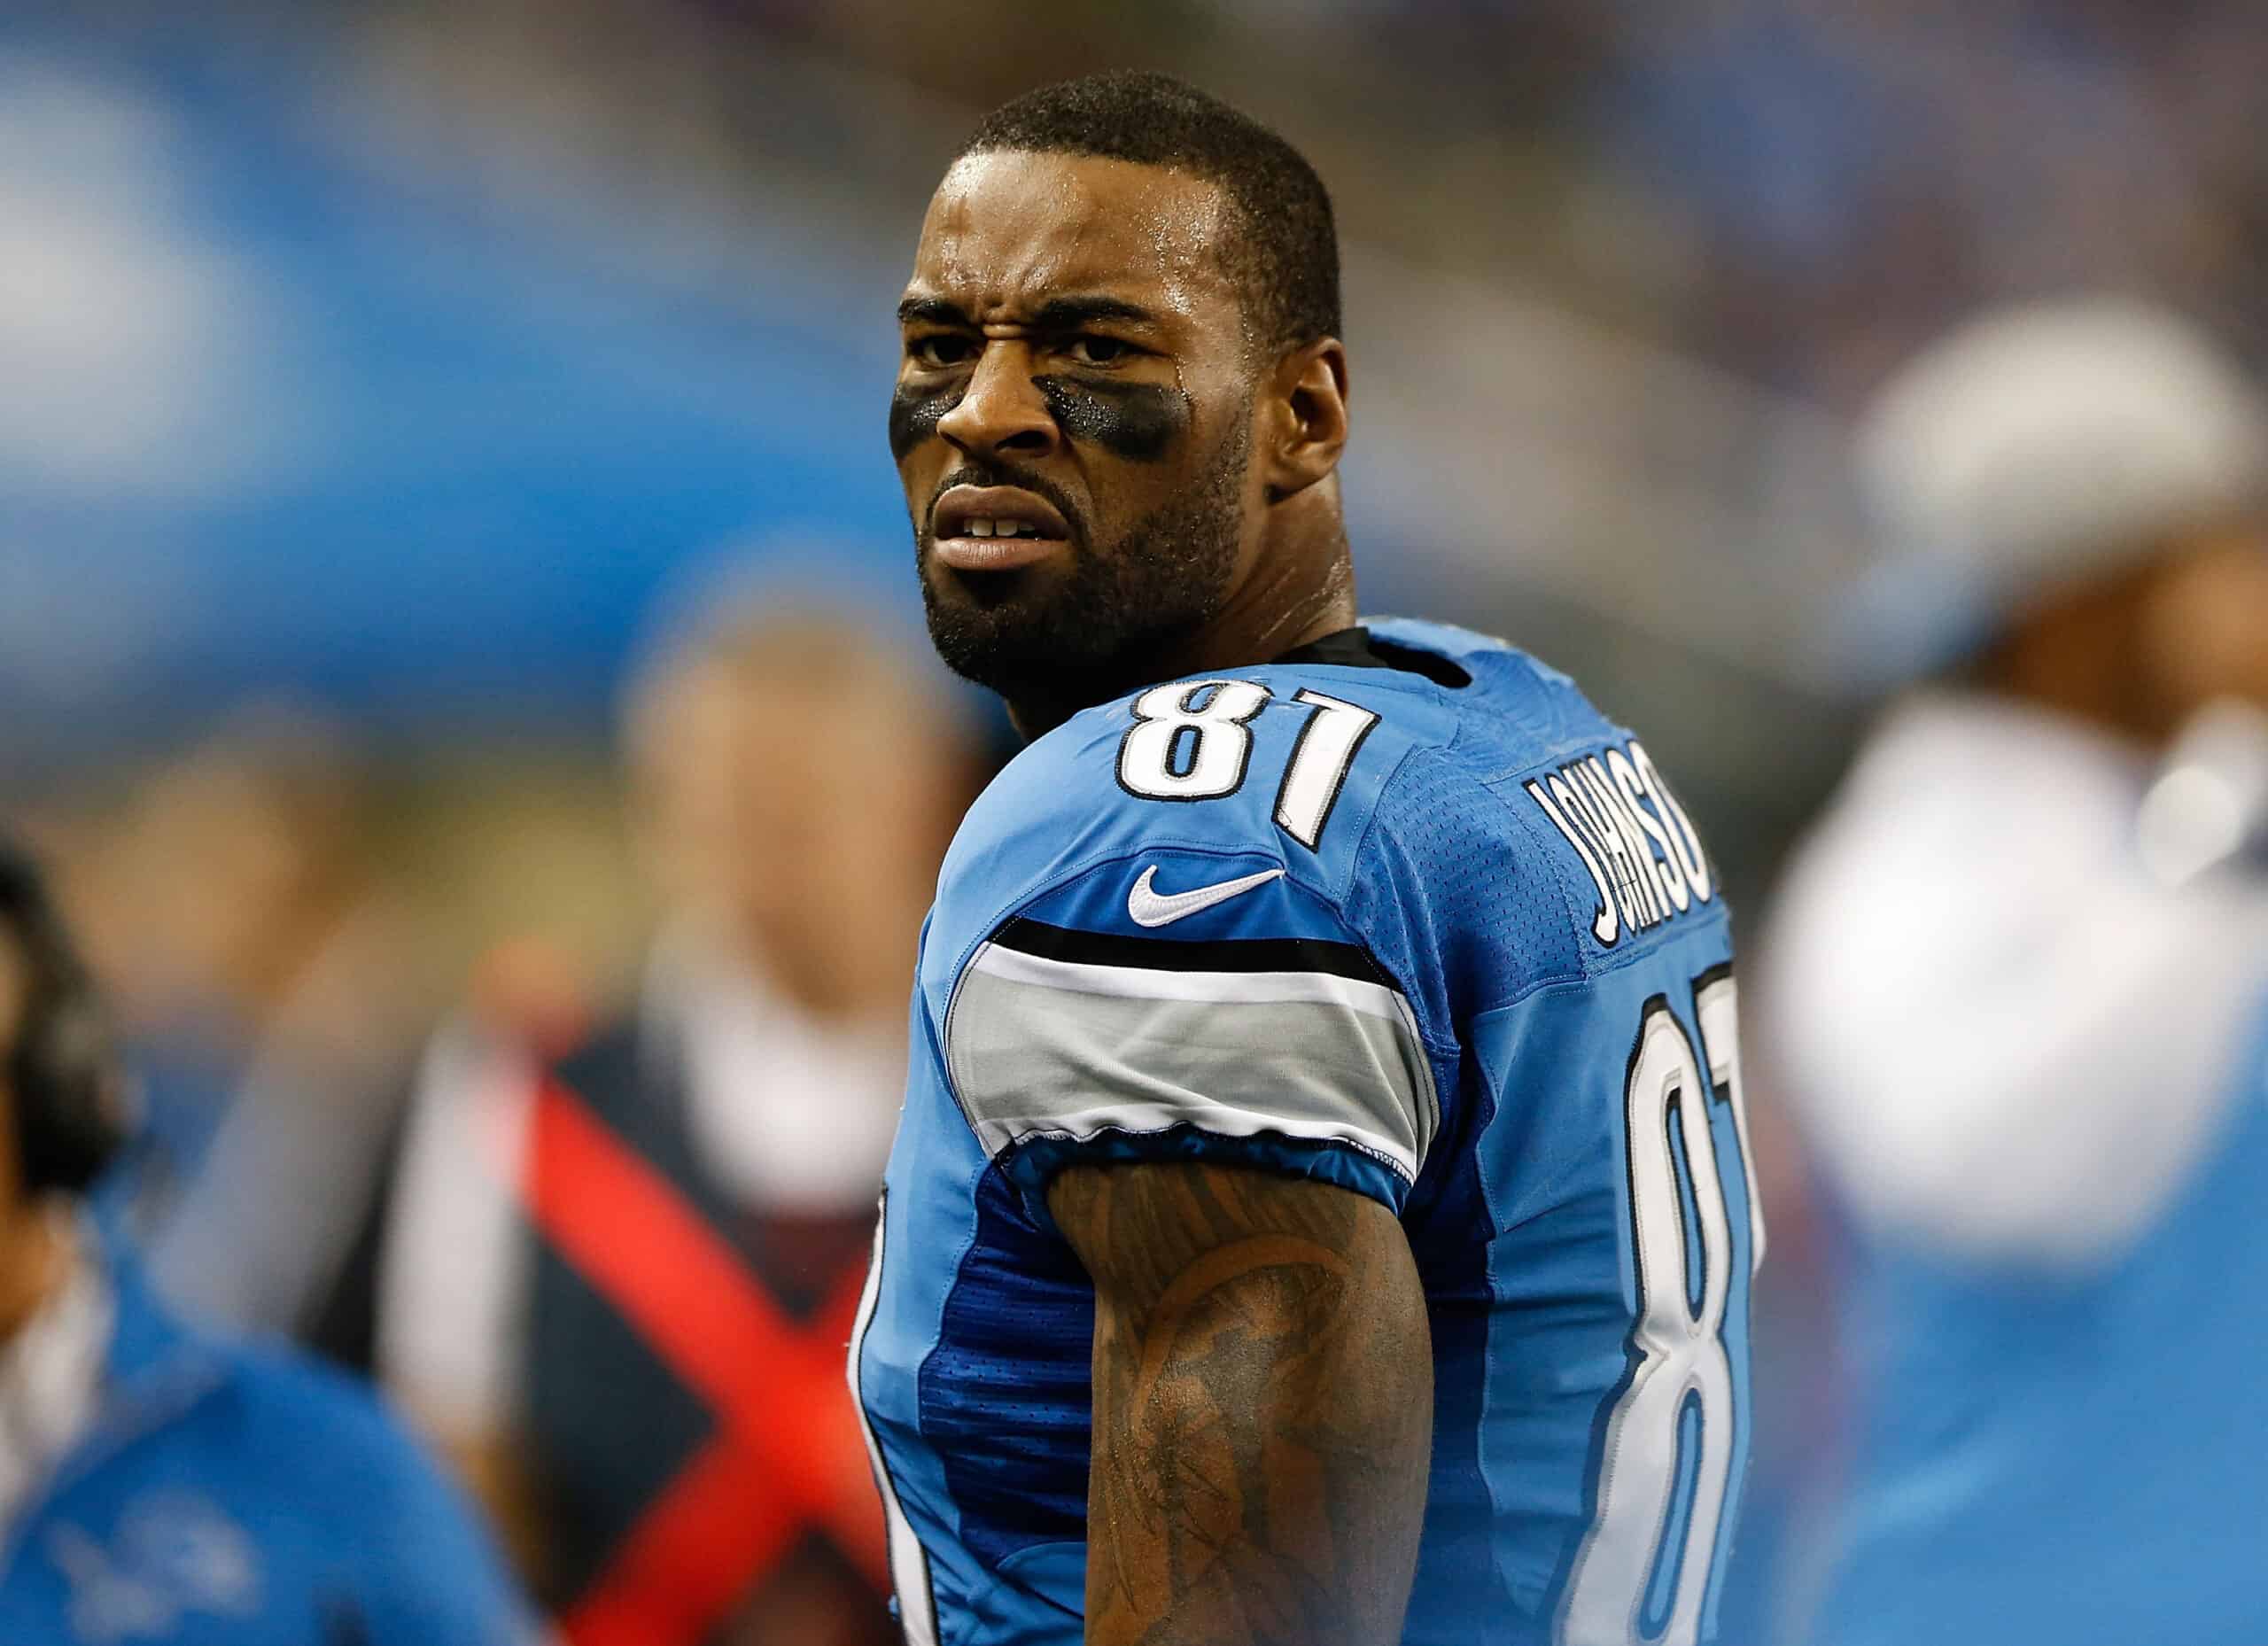 Calvin Johnson Net Worth - A Look At The Wealth And Legacy Of One Of The NFL's Greatest Wide Receivers